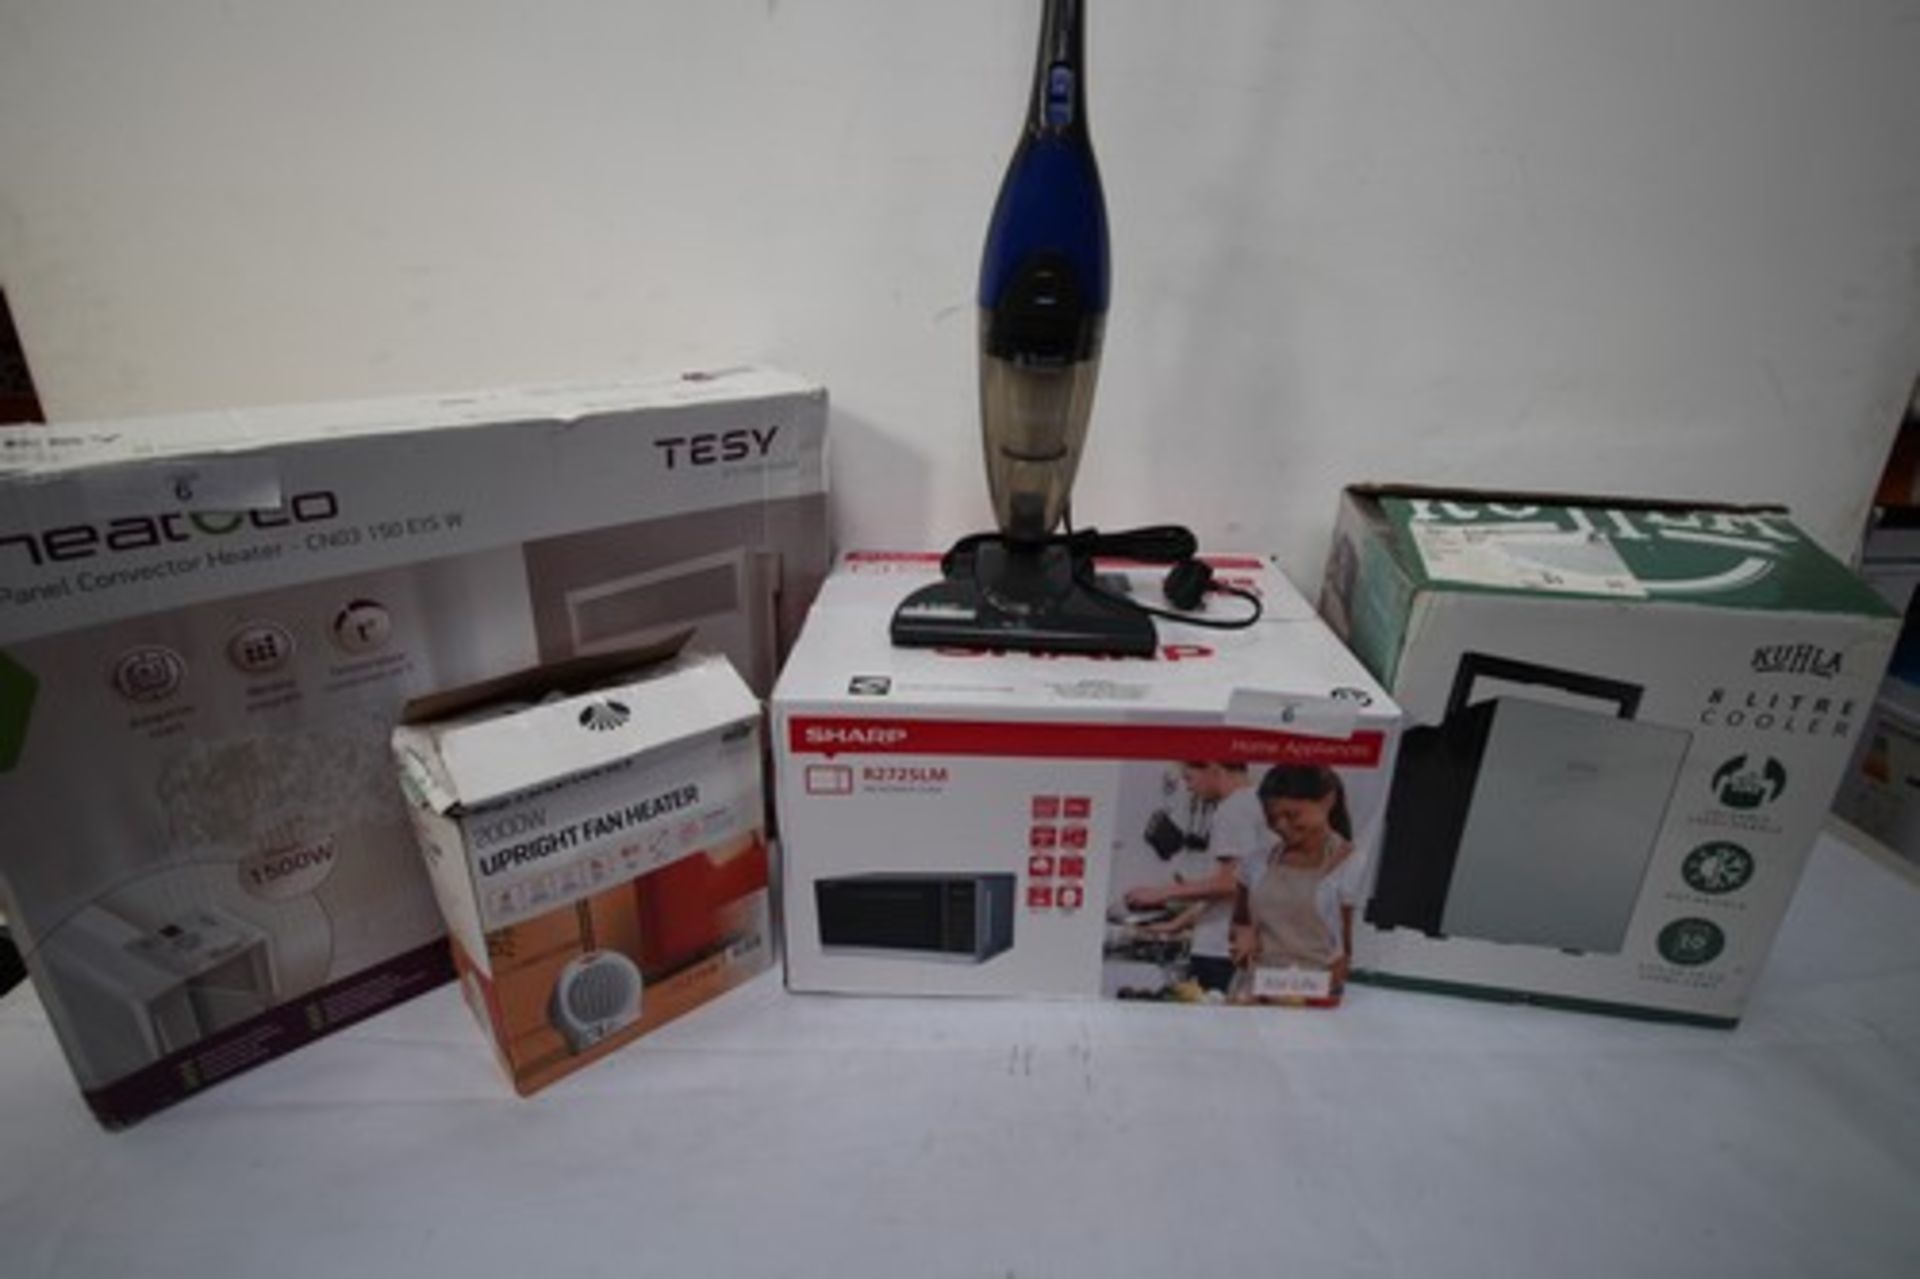 4 x electrical items, including Sharp R272SLM microwave, Kuhla 8L cooler, Daewoo and Tessy heaters -